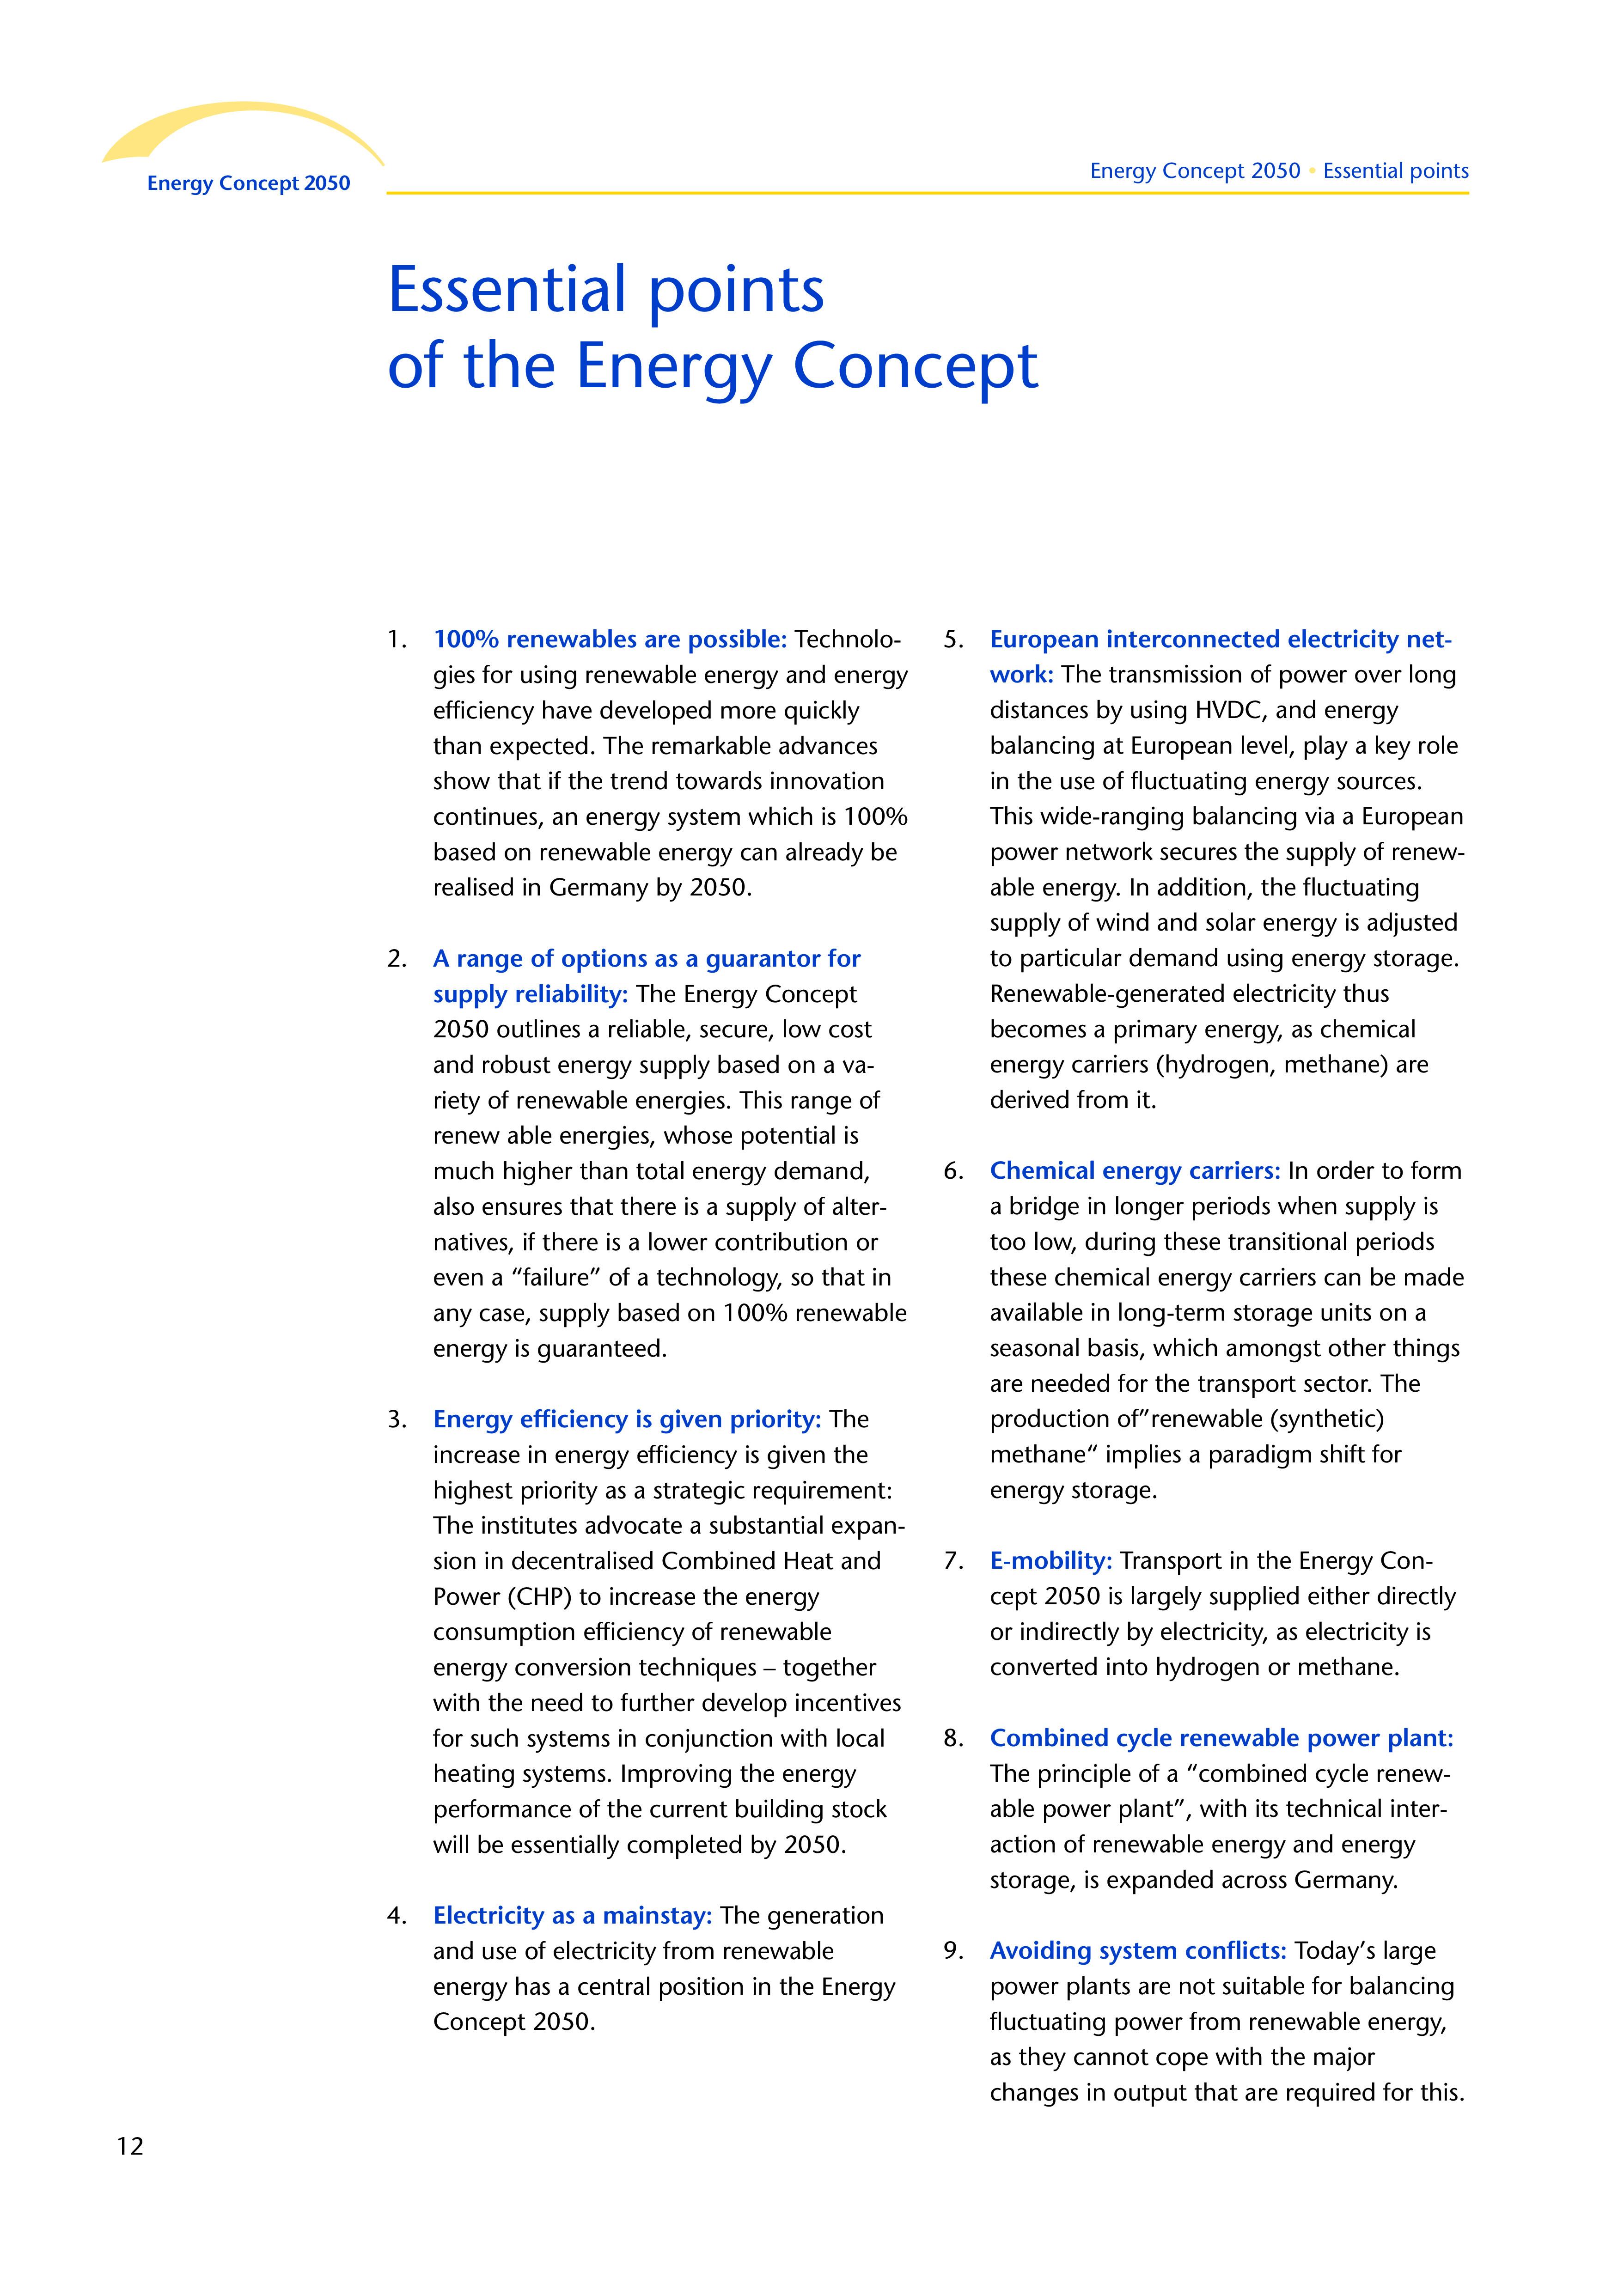 Energy Concept 2050 for Germany with an European and Global Perspective